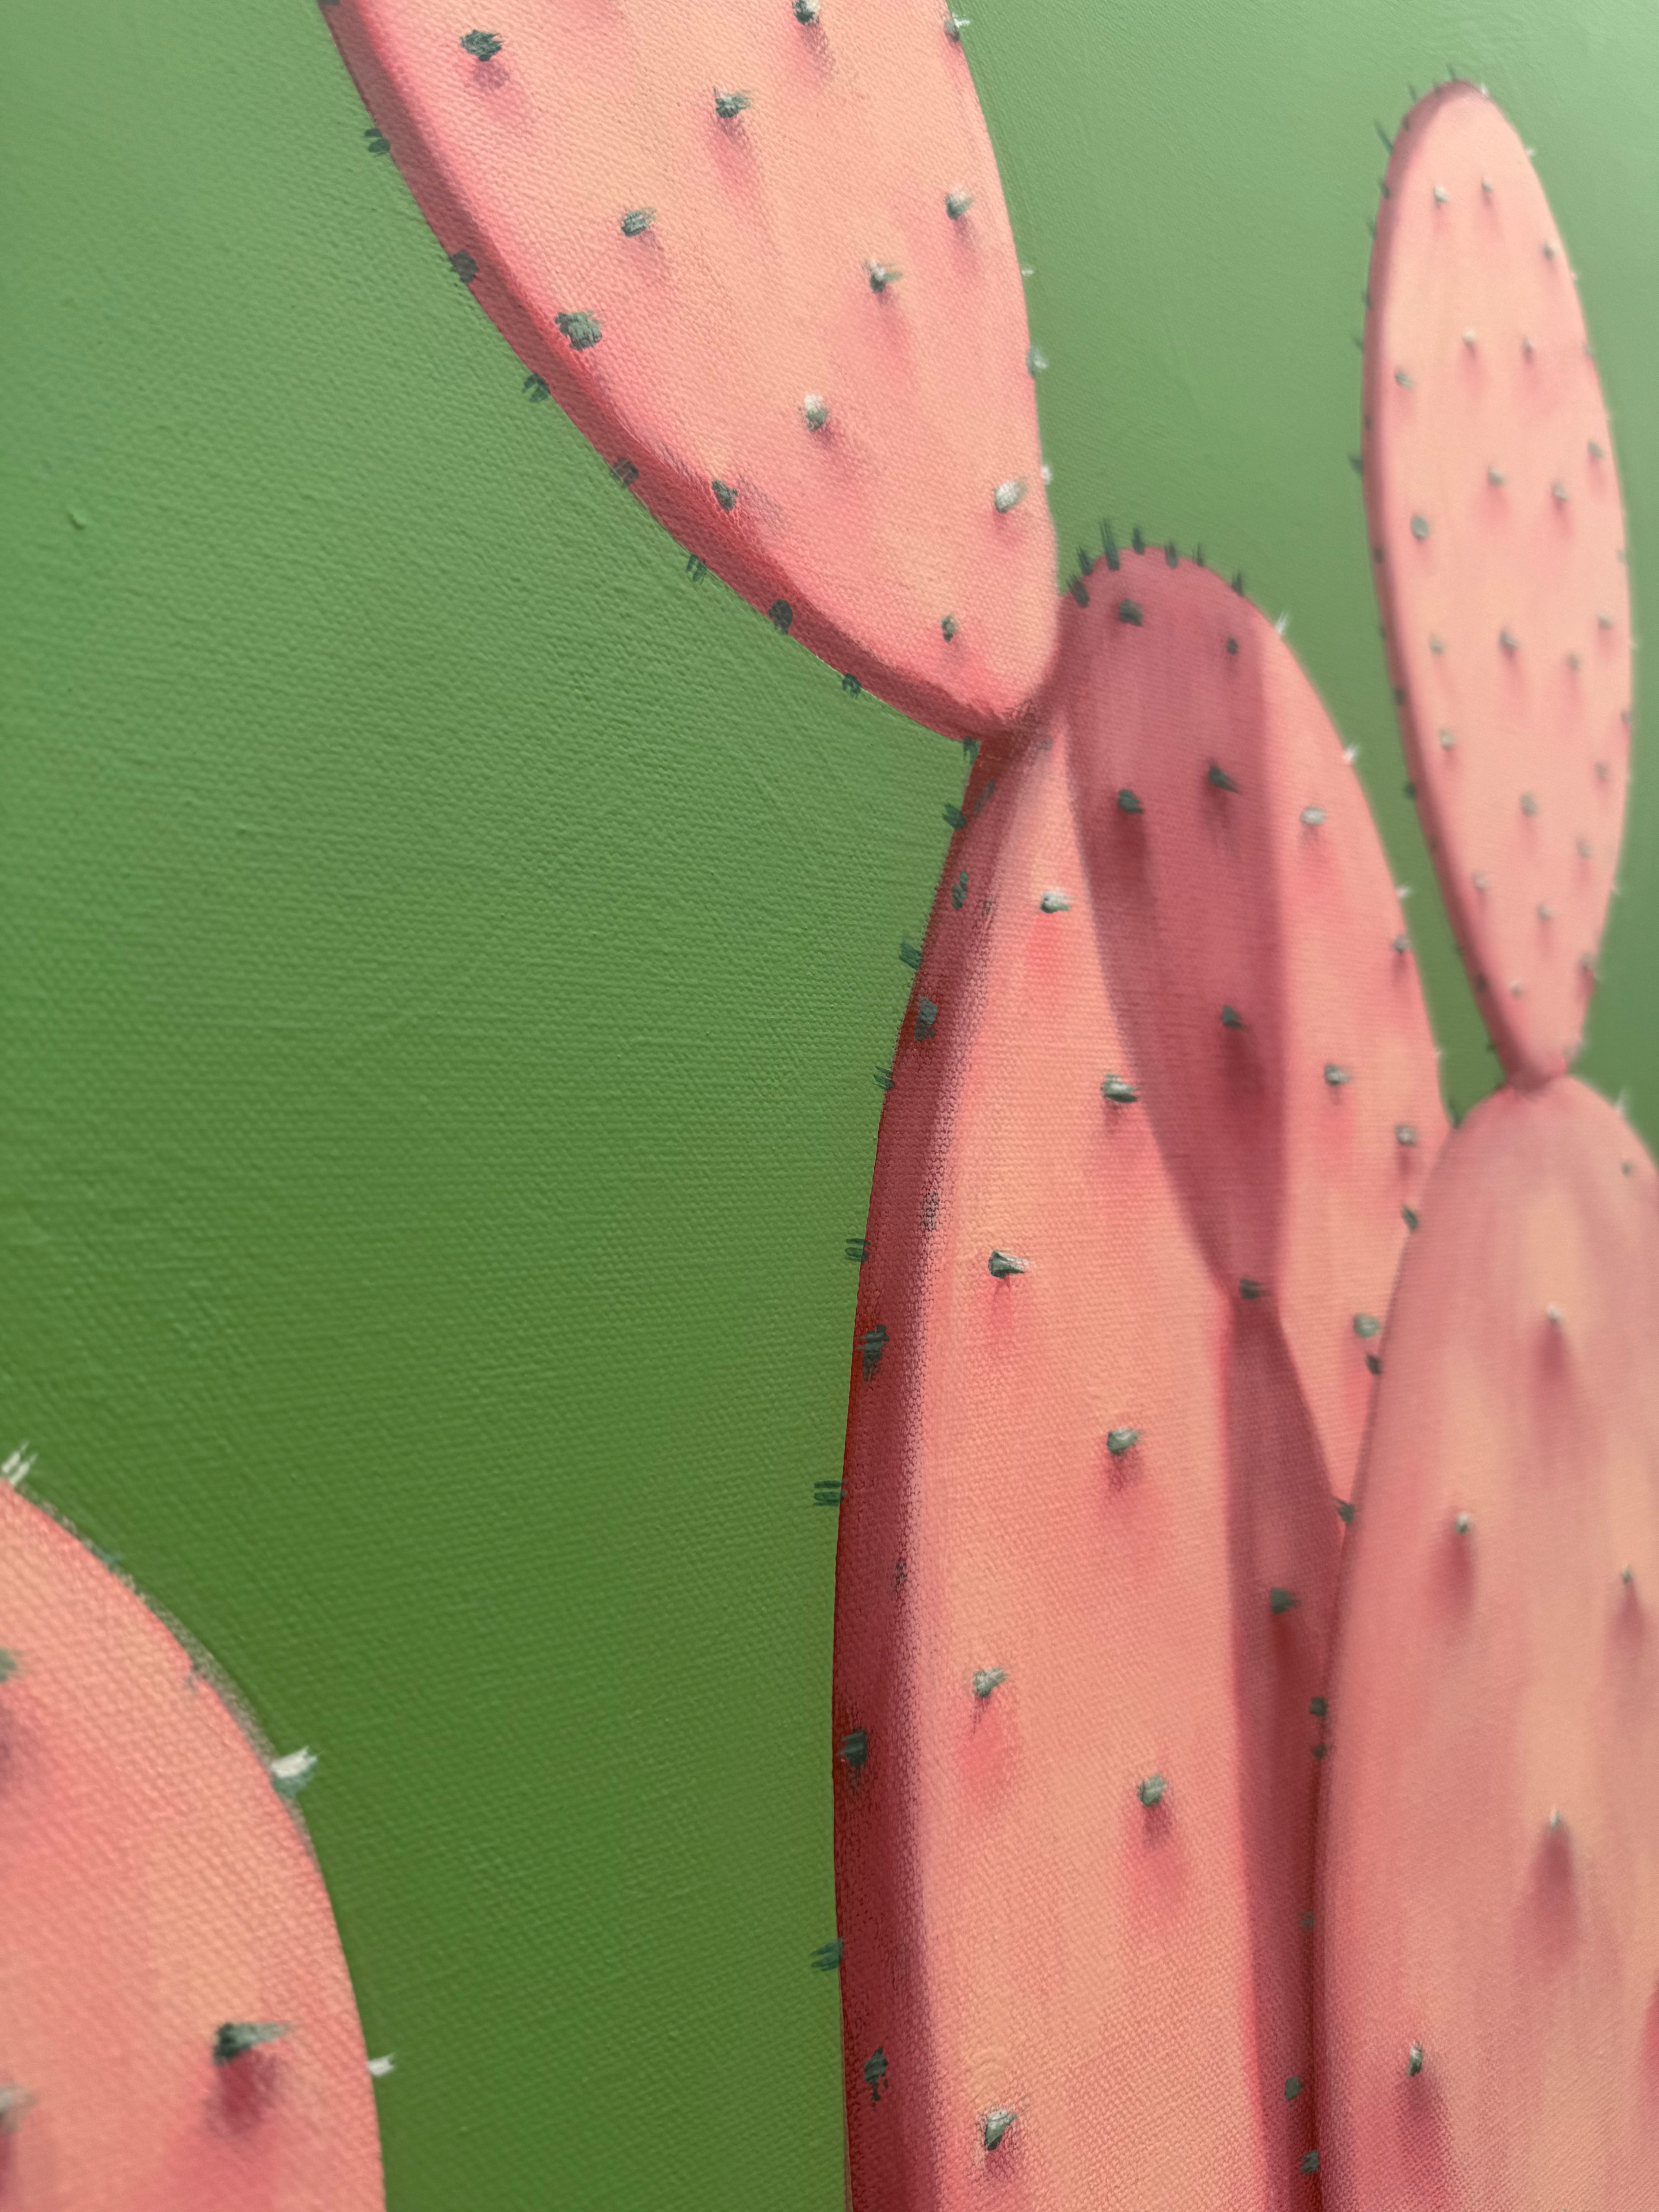 Pink Prickly Pear